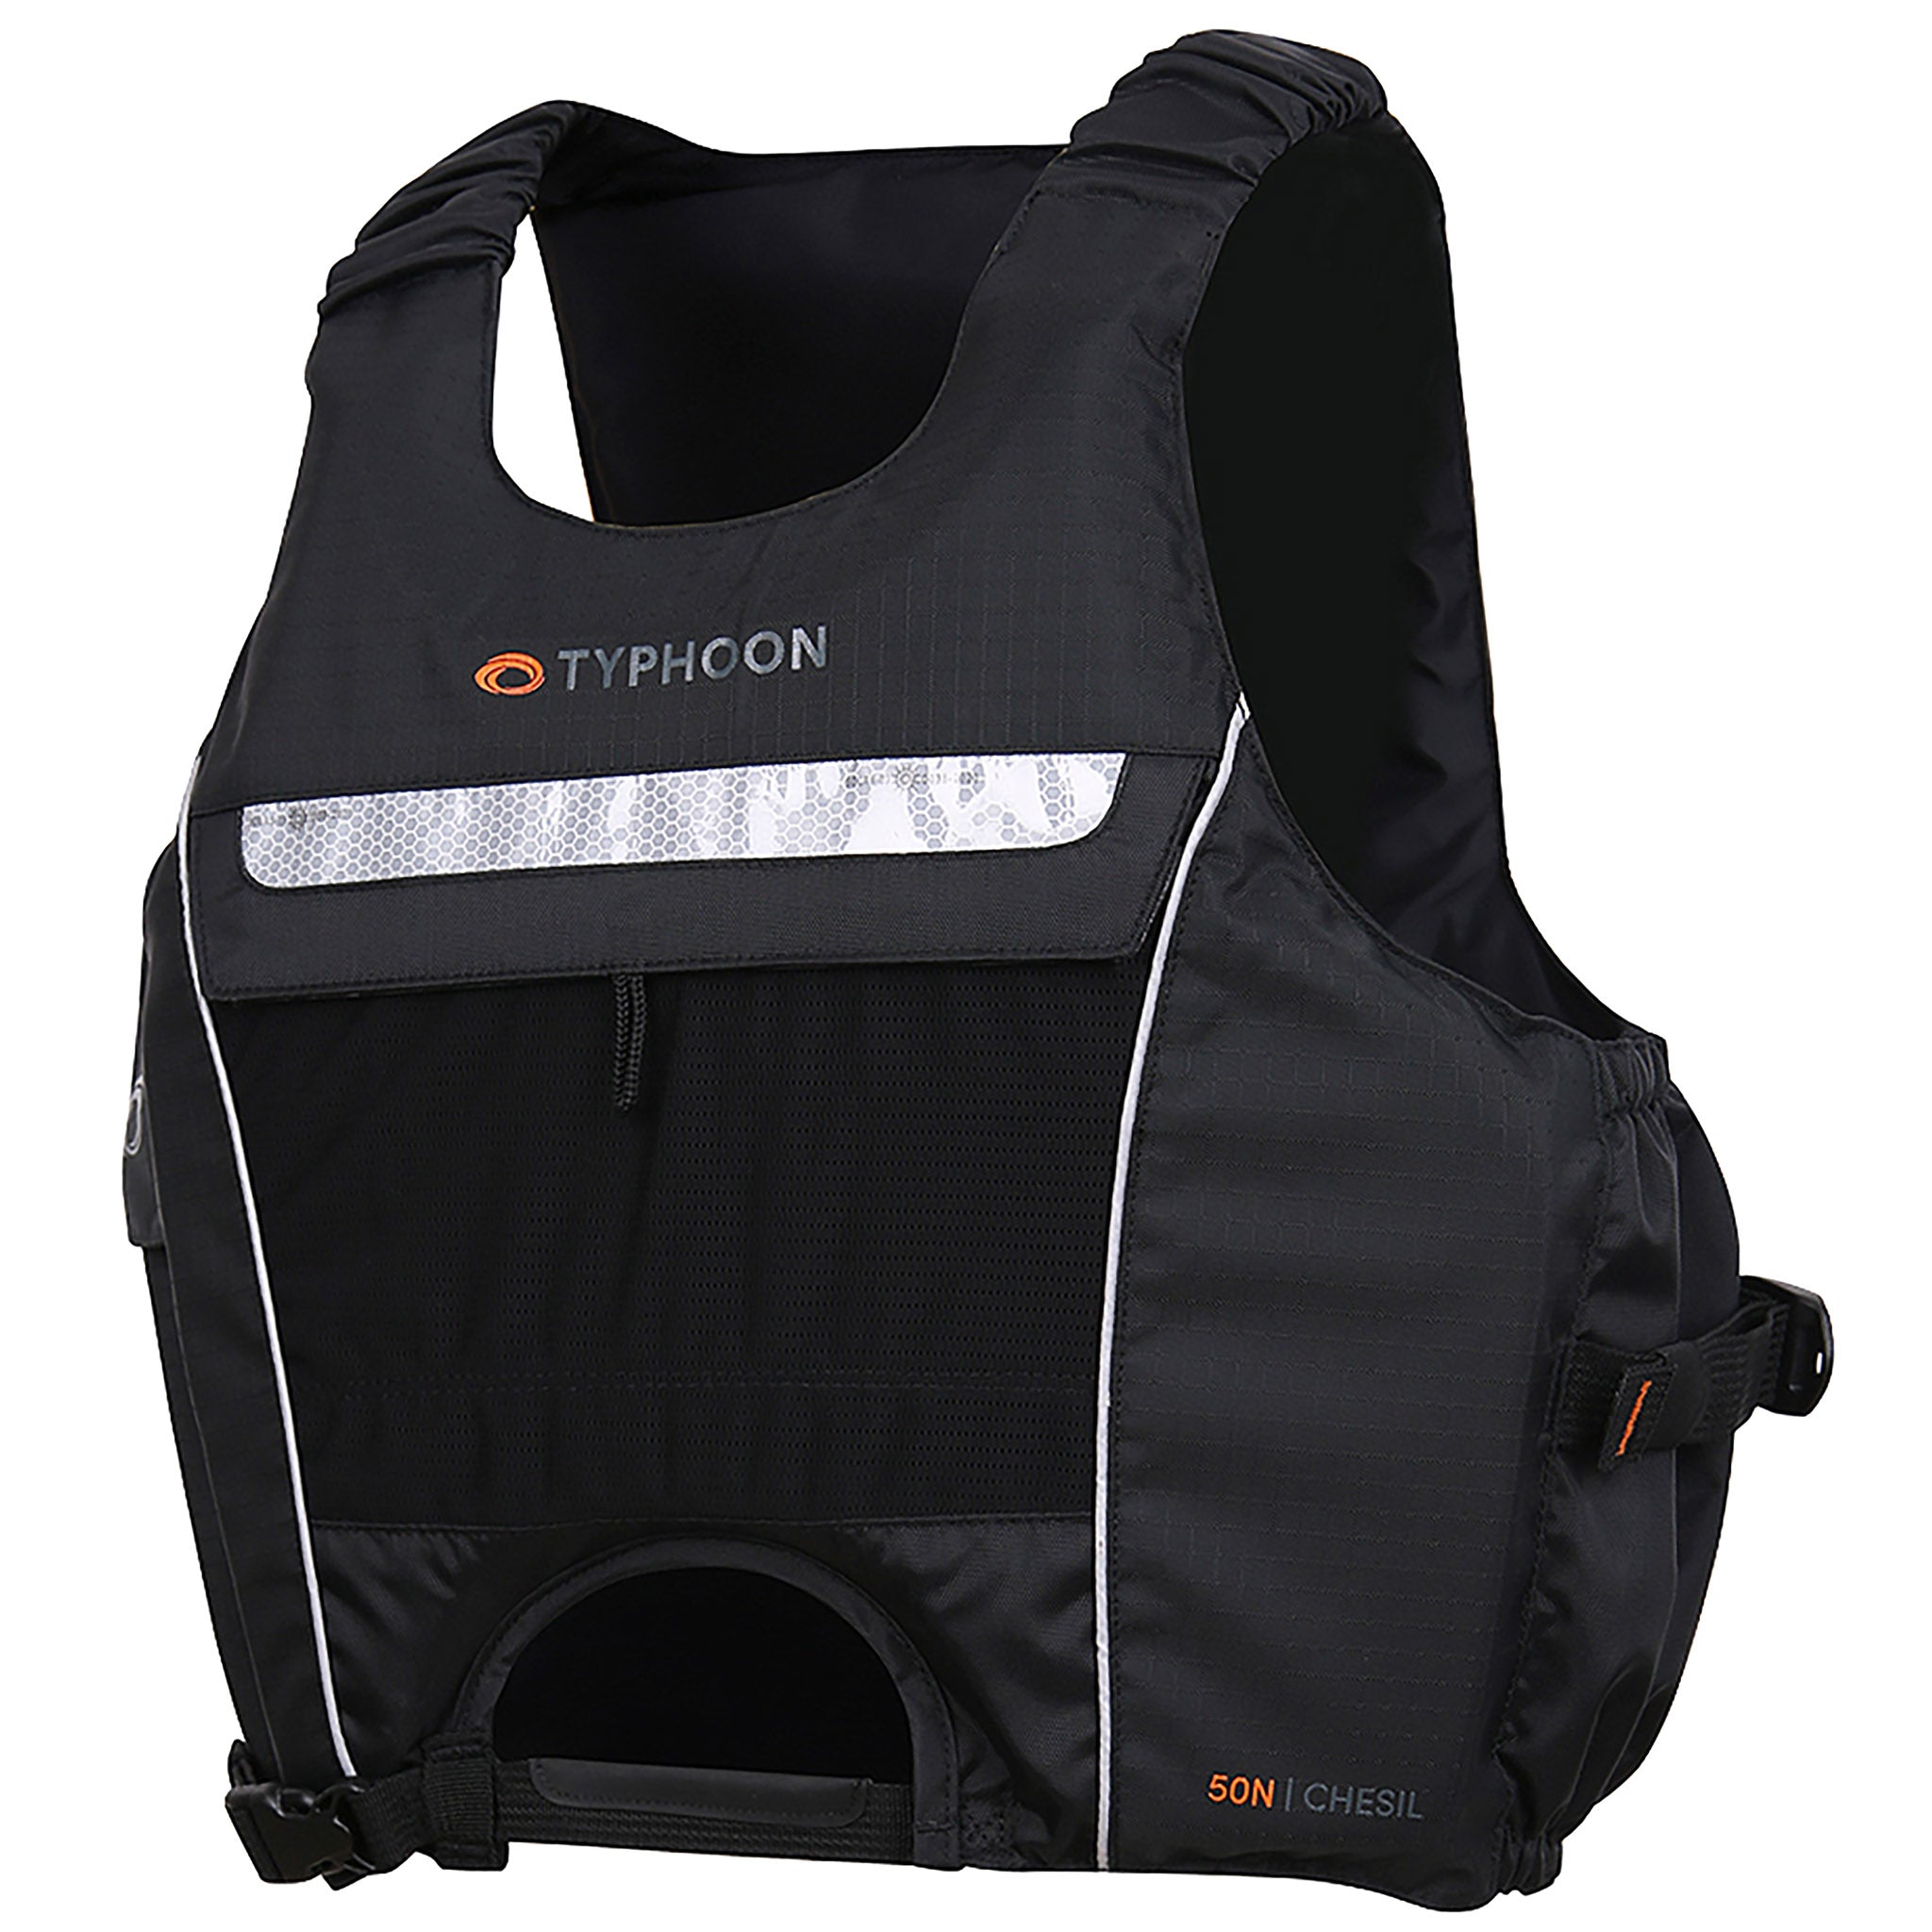 Typhoon Chesil 50N Buoyancy Aid for Dinghy, SUP or Kayak